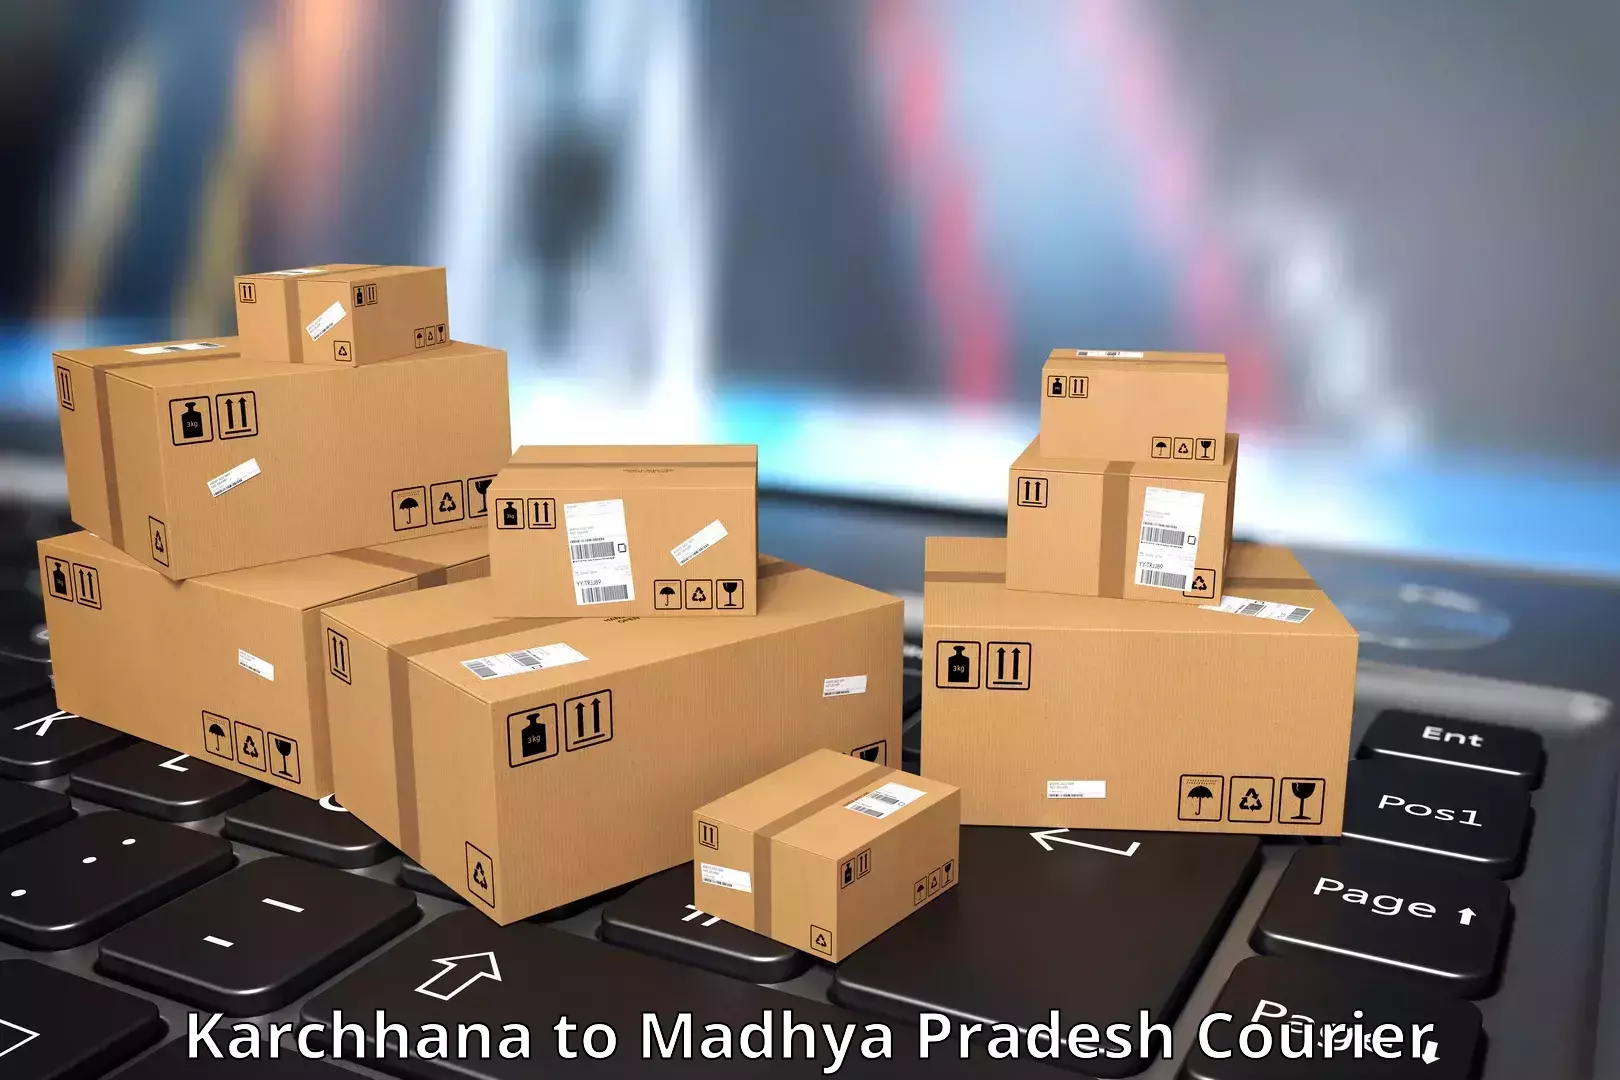 Premium courier solutions Karchhana to BHEL Bhopal